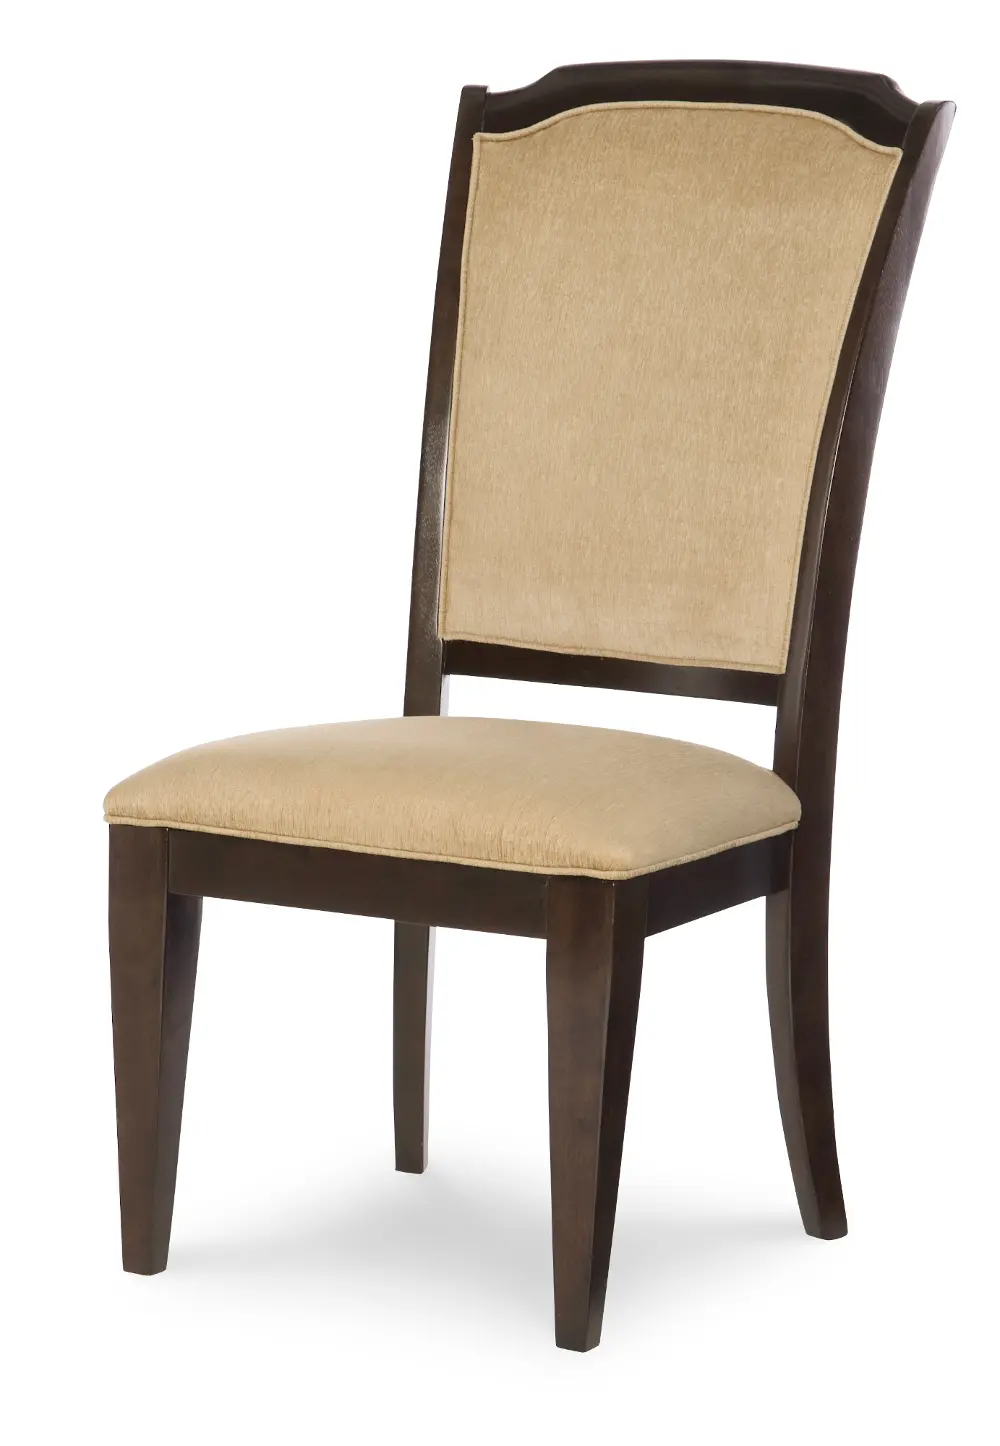 Mahogany Brown Upholstered Dining Room Chair - Sophia Collection-1